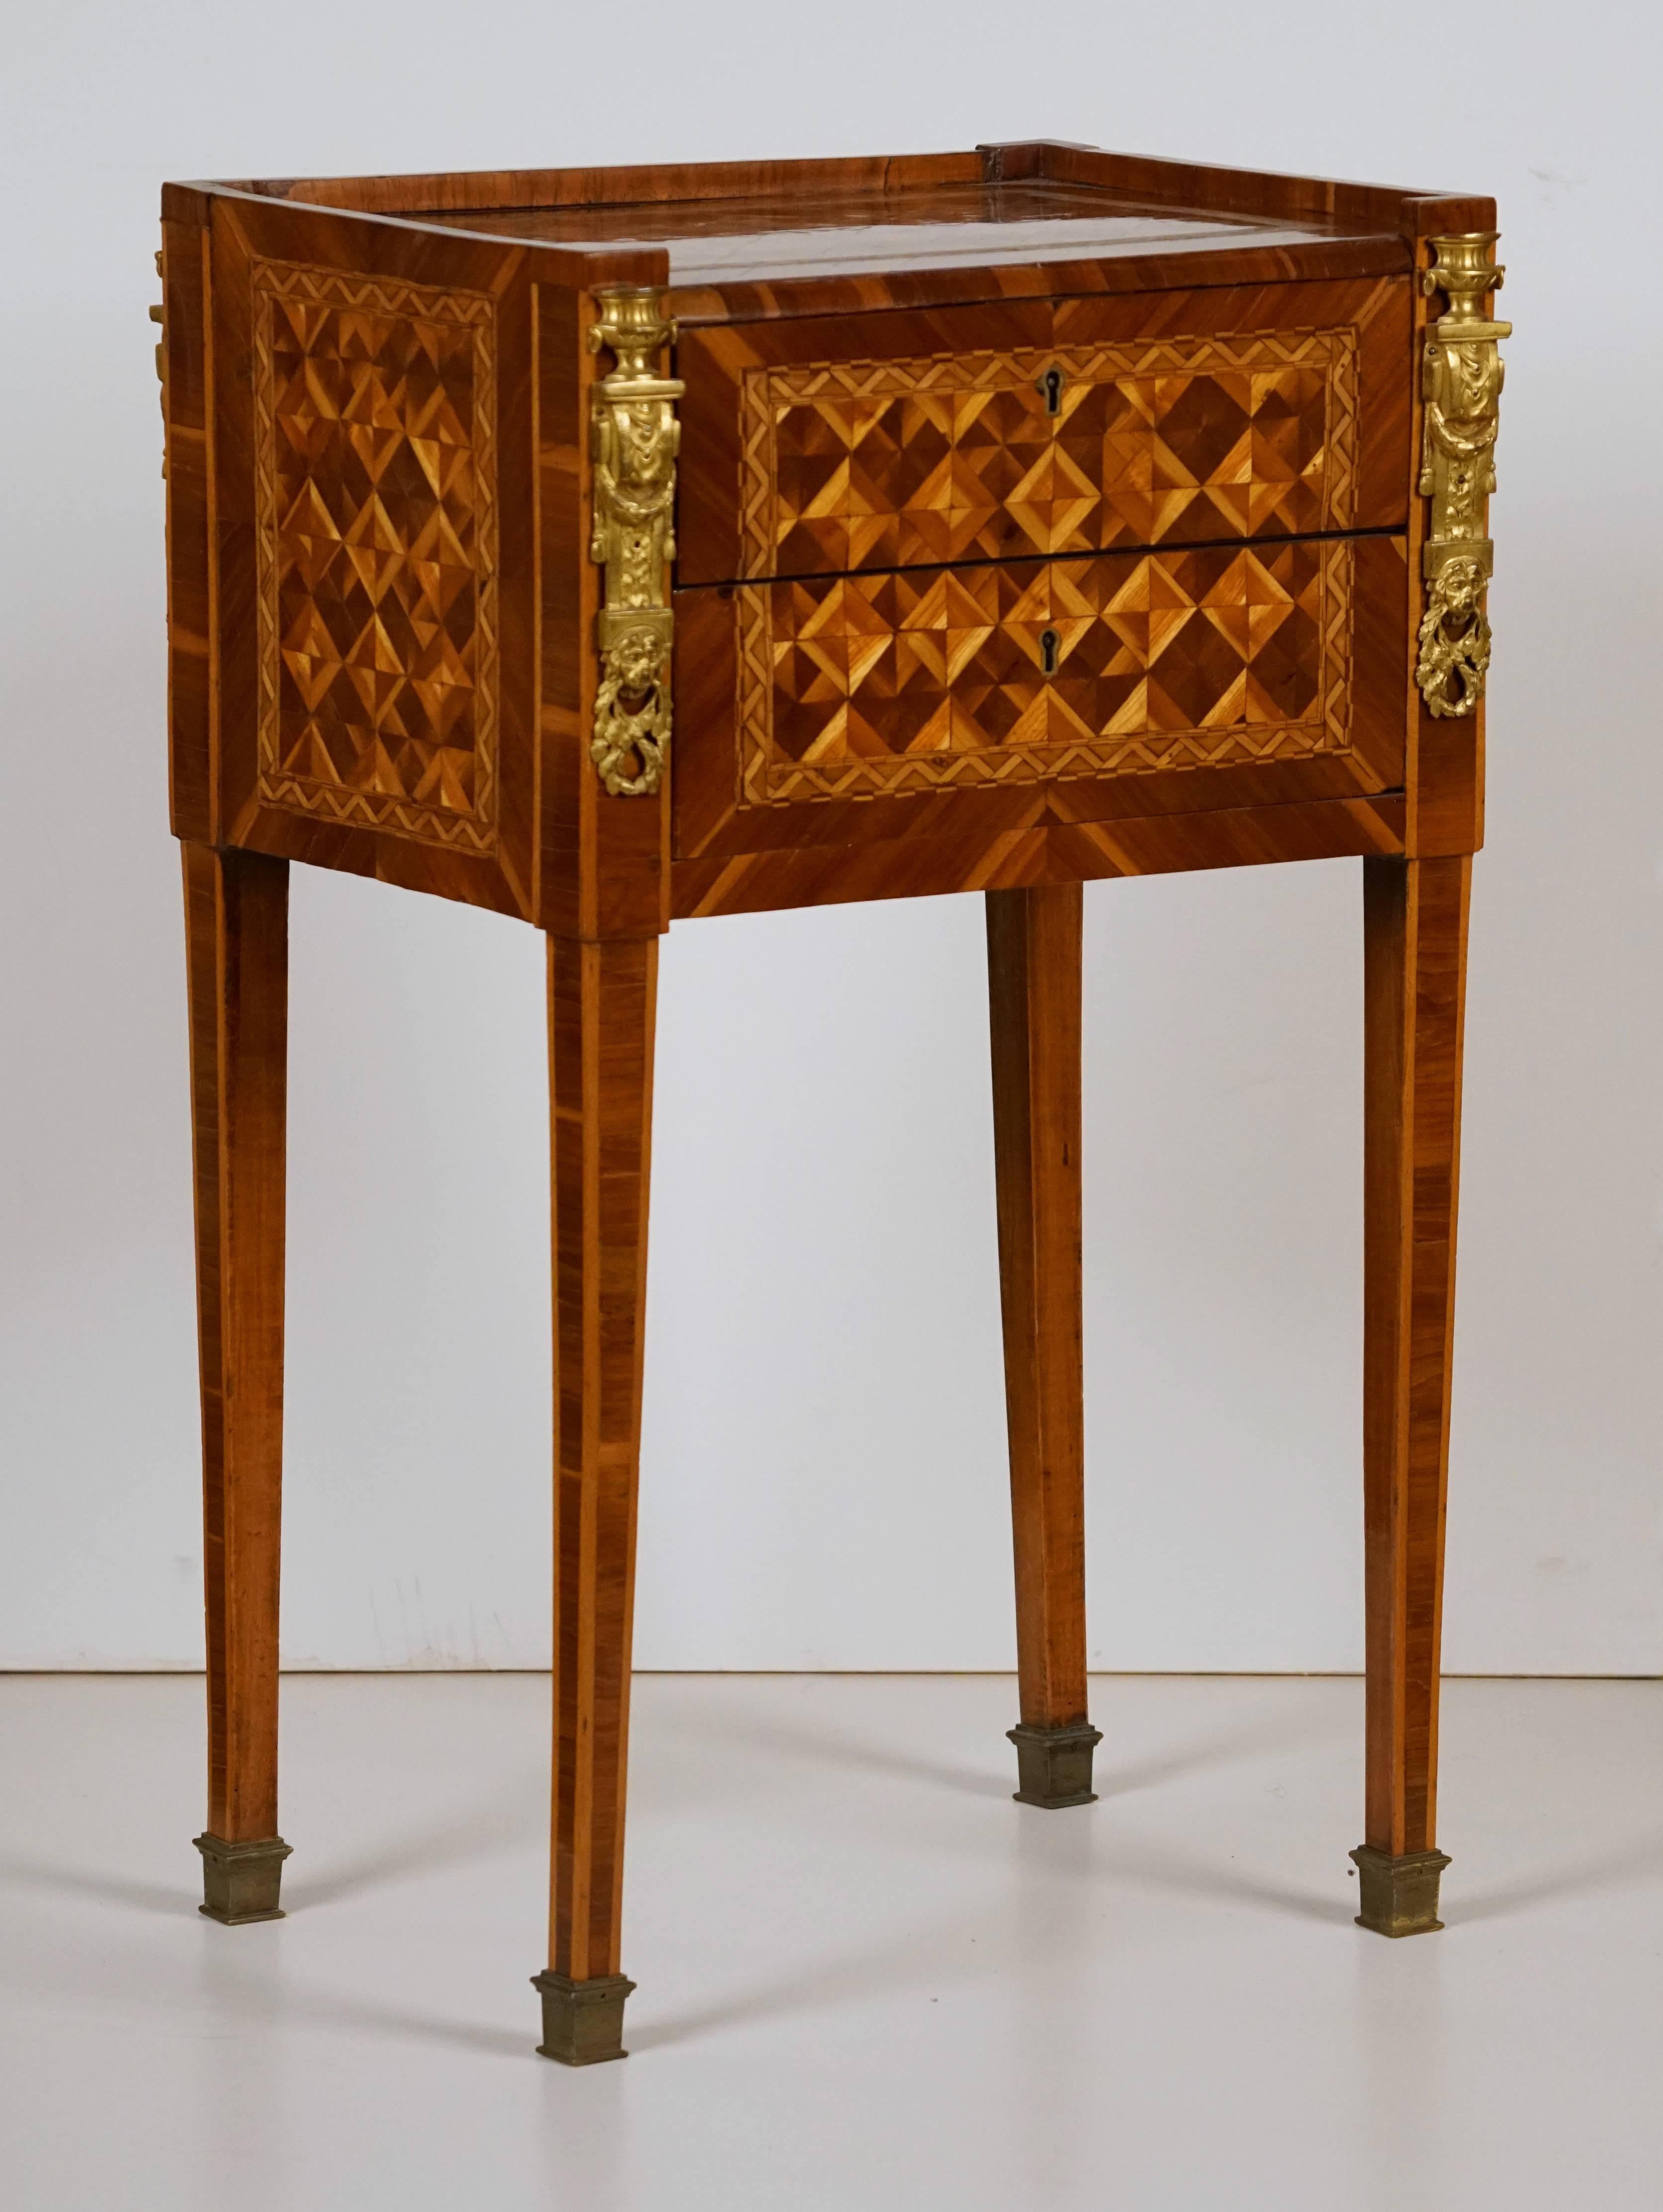 A Fine Louis XVI Ormolu Mounted 
Marquetry & Parquetry Table en Chiffoniere
18th Century
Attributed to Jean Francois Leleu

Jean Francois Leleu, Maitre in 1764

Height 28 in.   Width 17 in.   Depth 12 in.

Provenance:
Private Collection Paris,